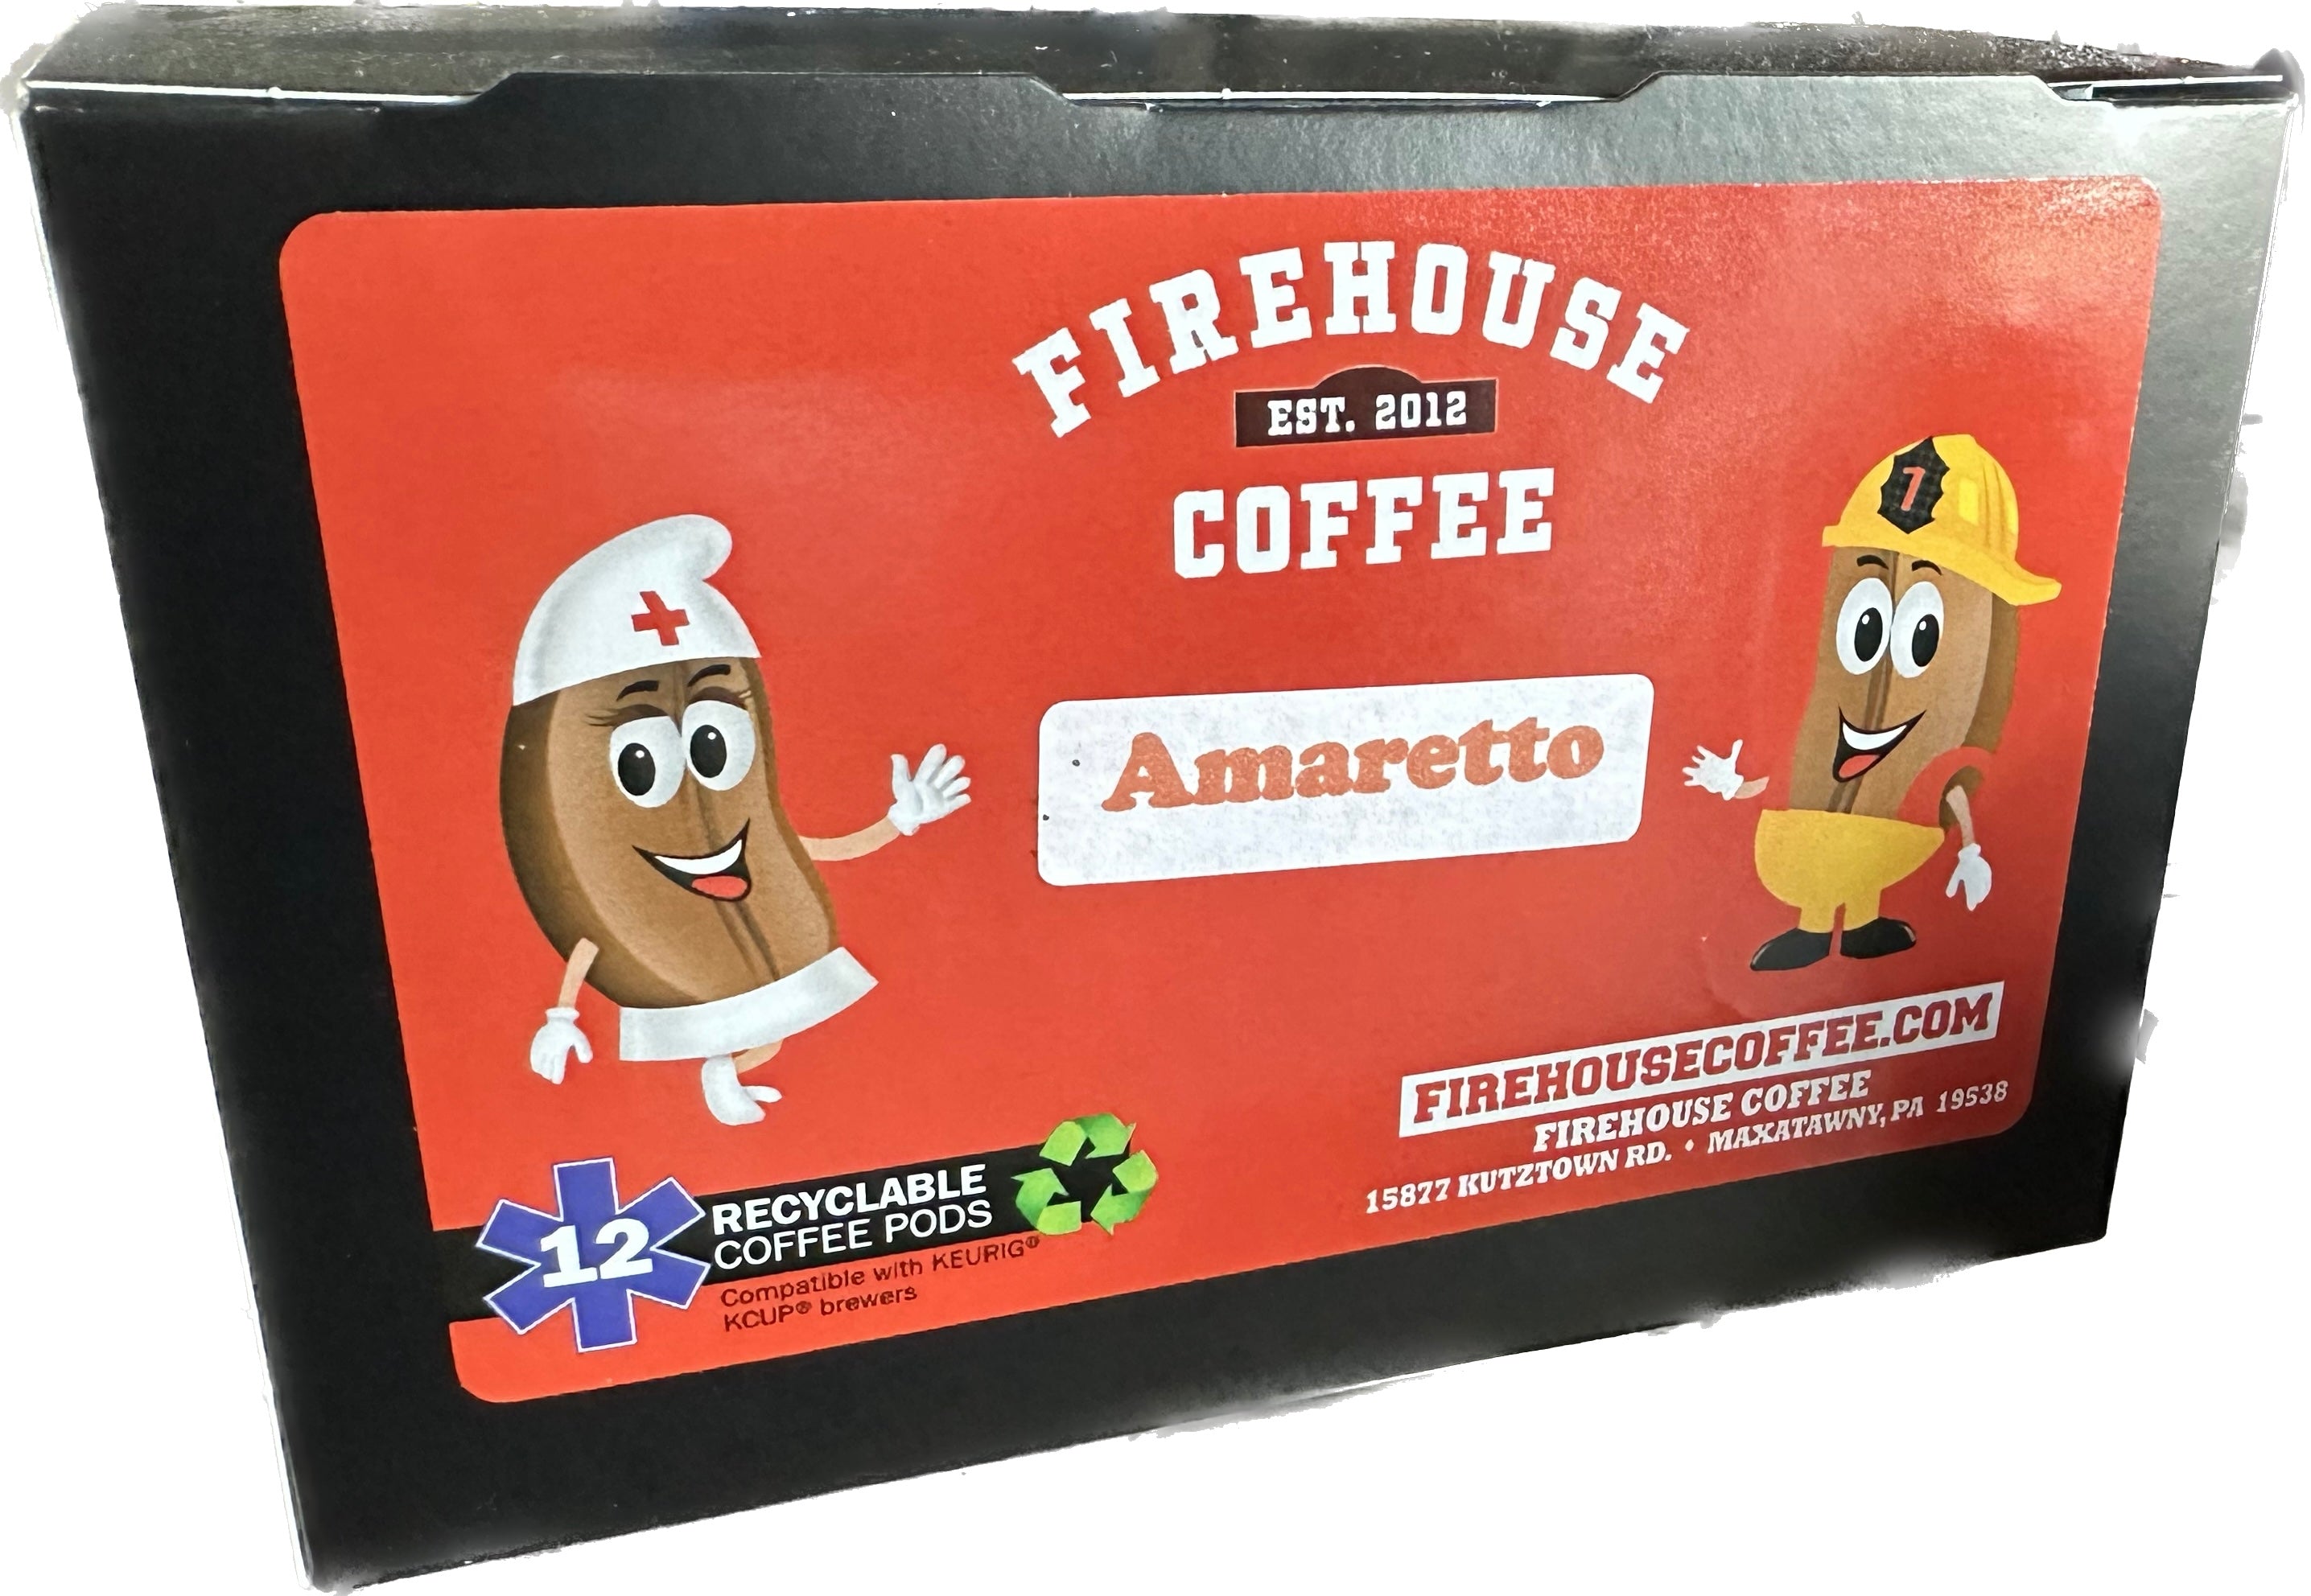 Amaretto Flavored Coffee from Firehouse Coffee